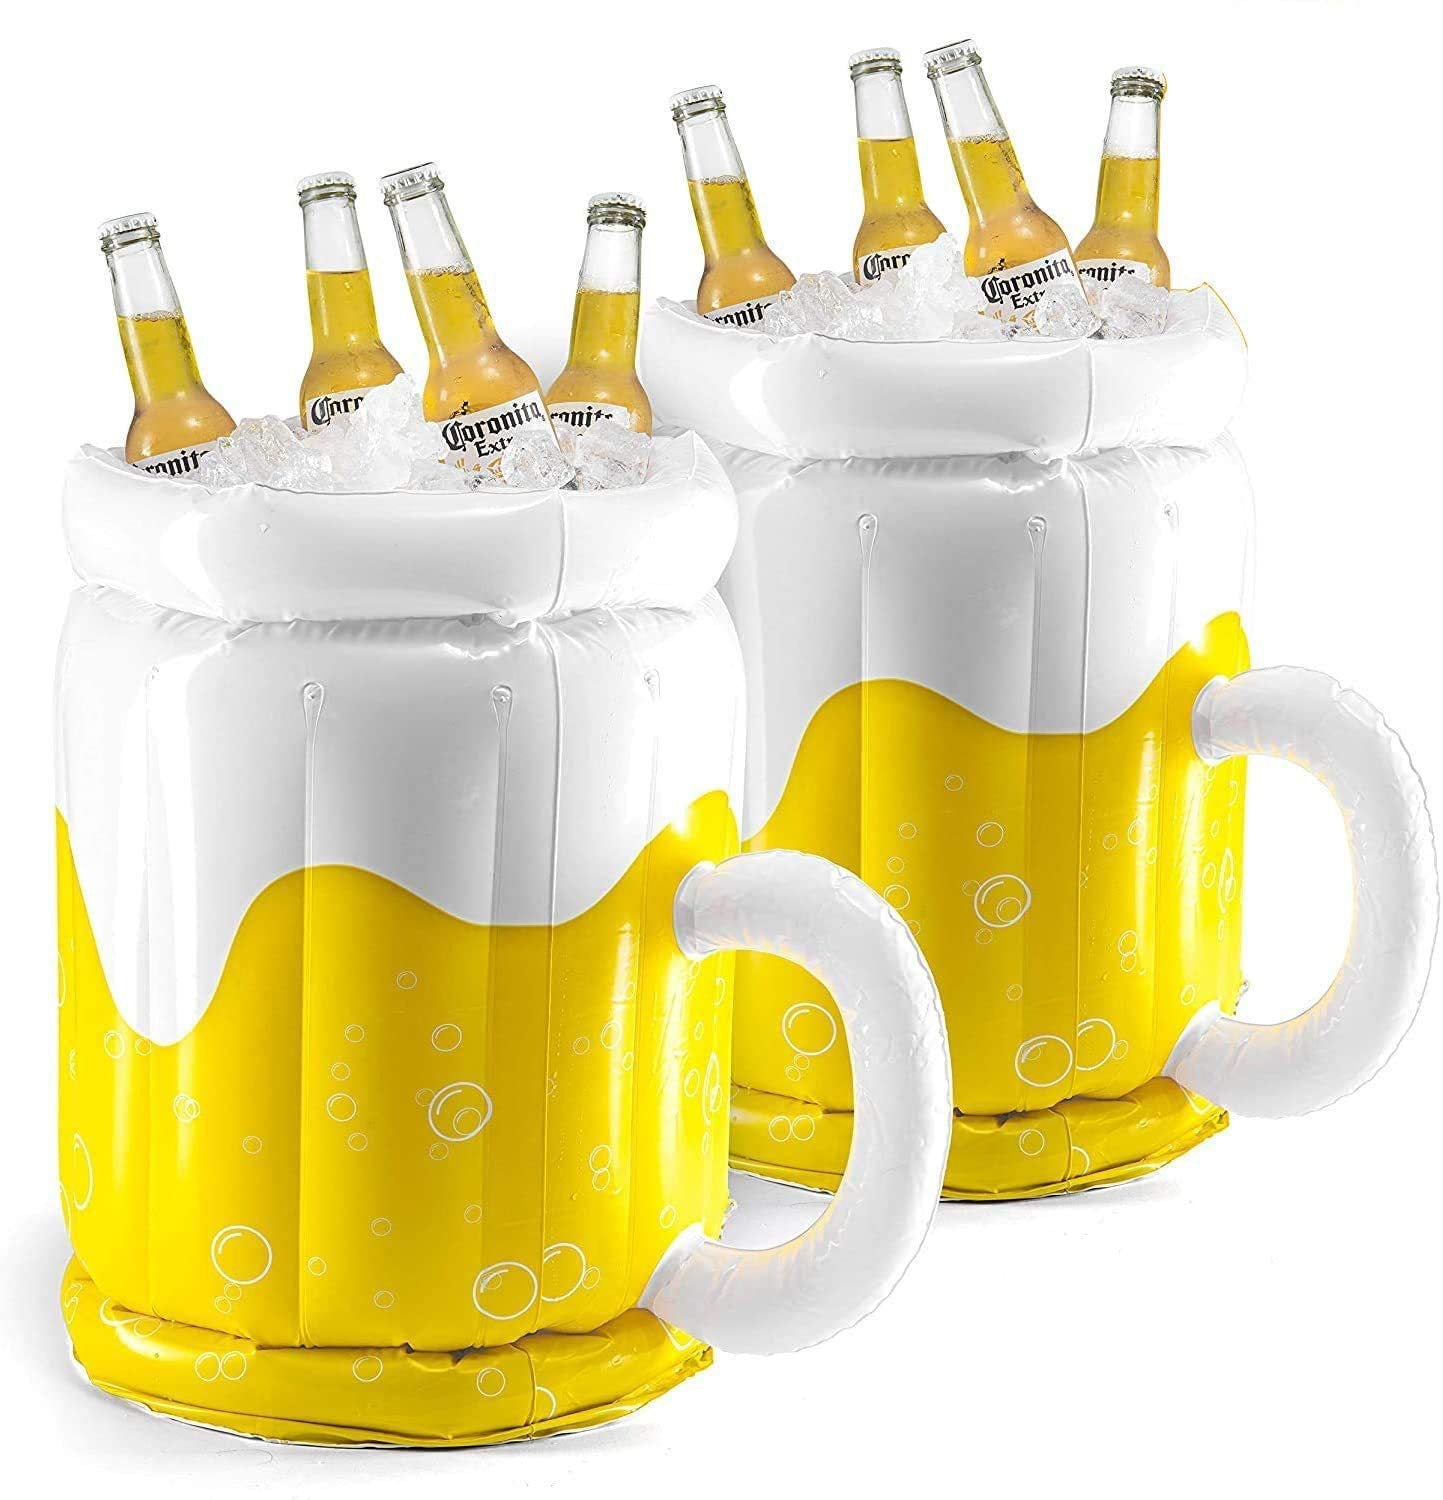 Large Inflatable Beer Mug Cooler Pool Float Drink Cooler For Adults Parties 2 In1 Drink Floatie And Party Supplies Great Toy For Beach Pool And Jacuzzi